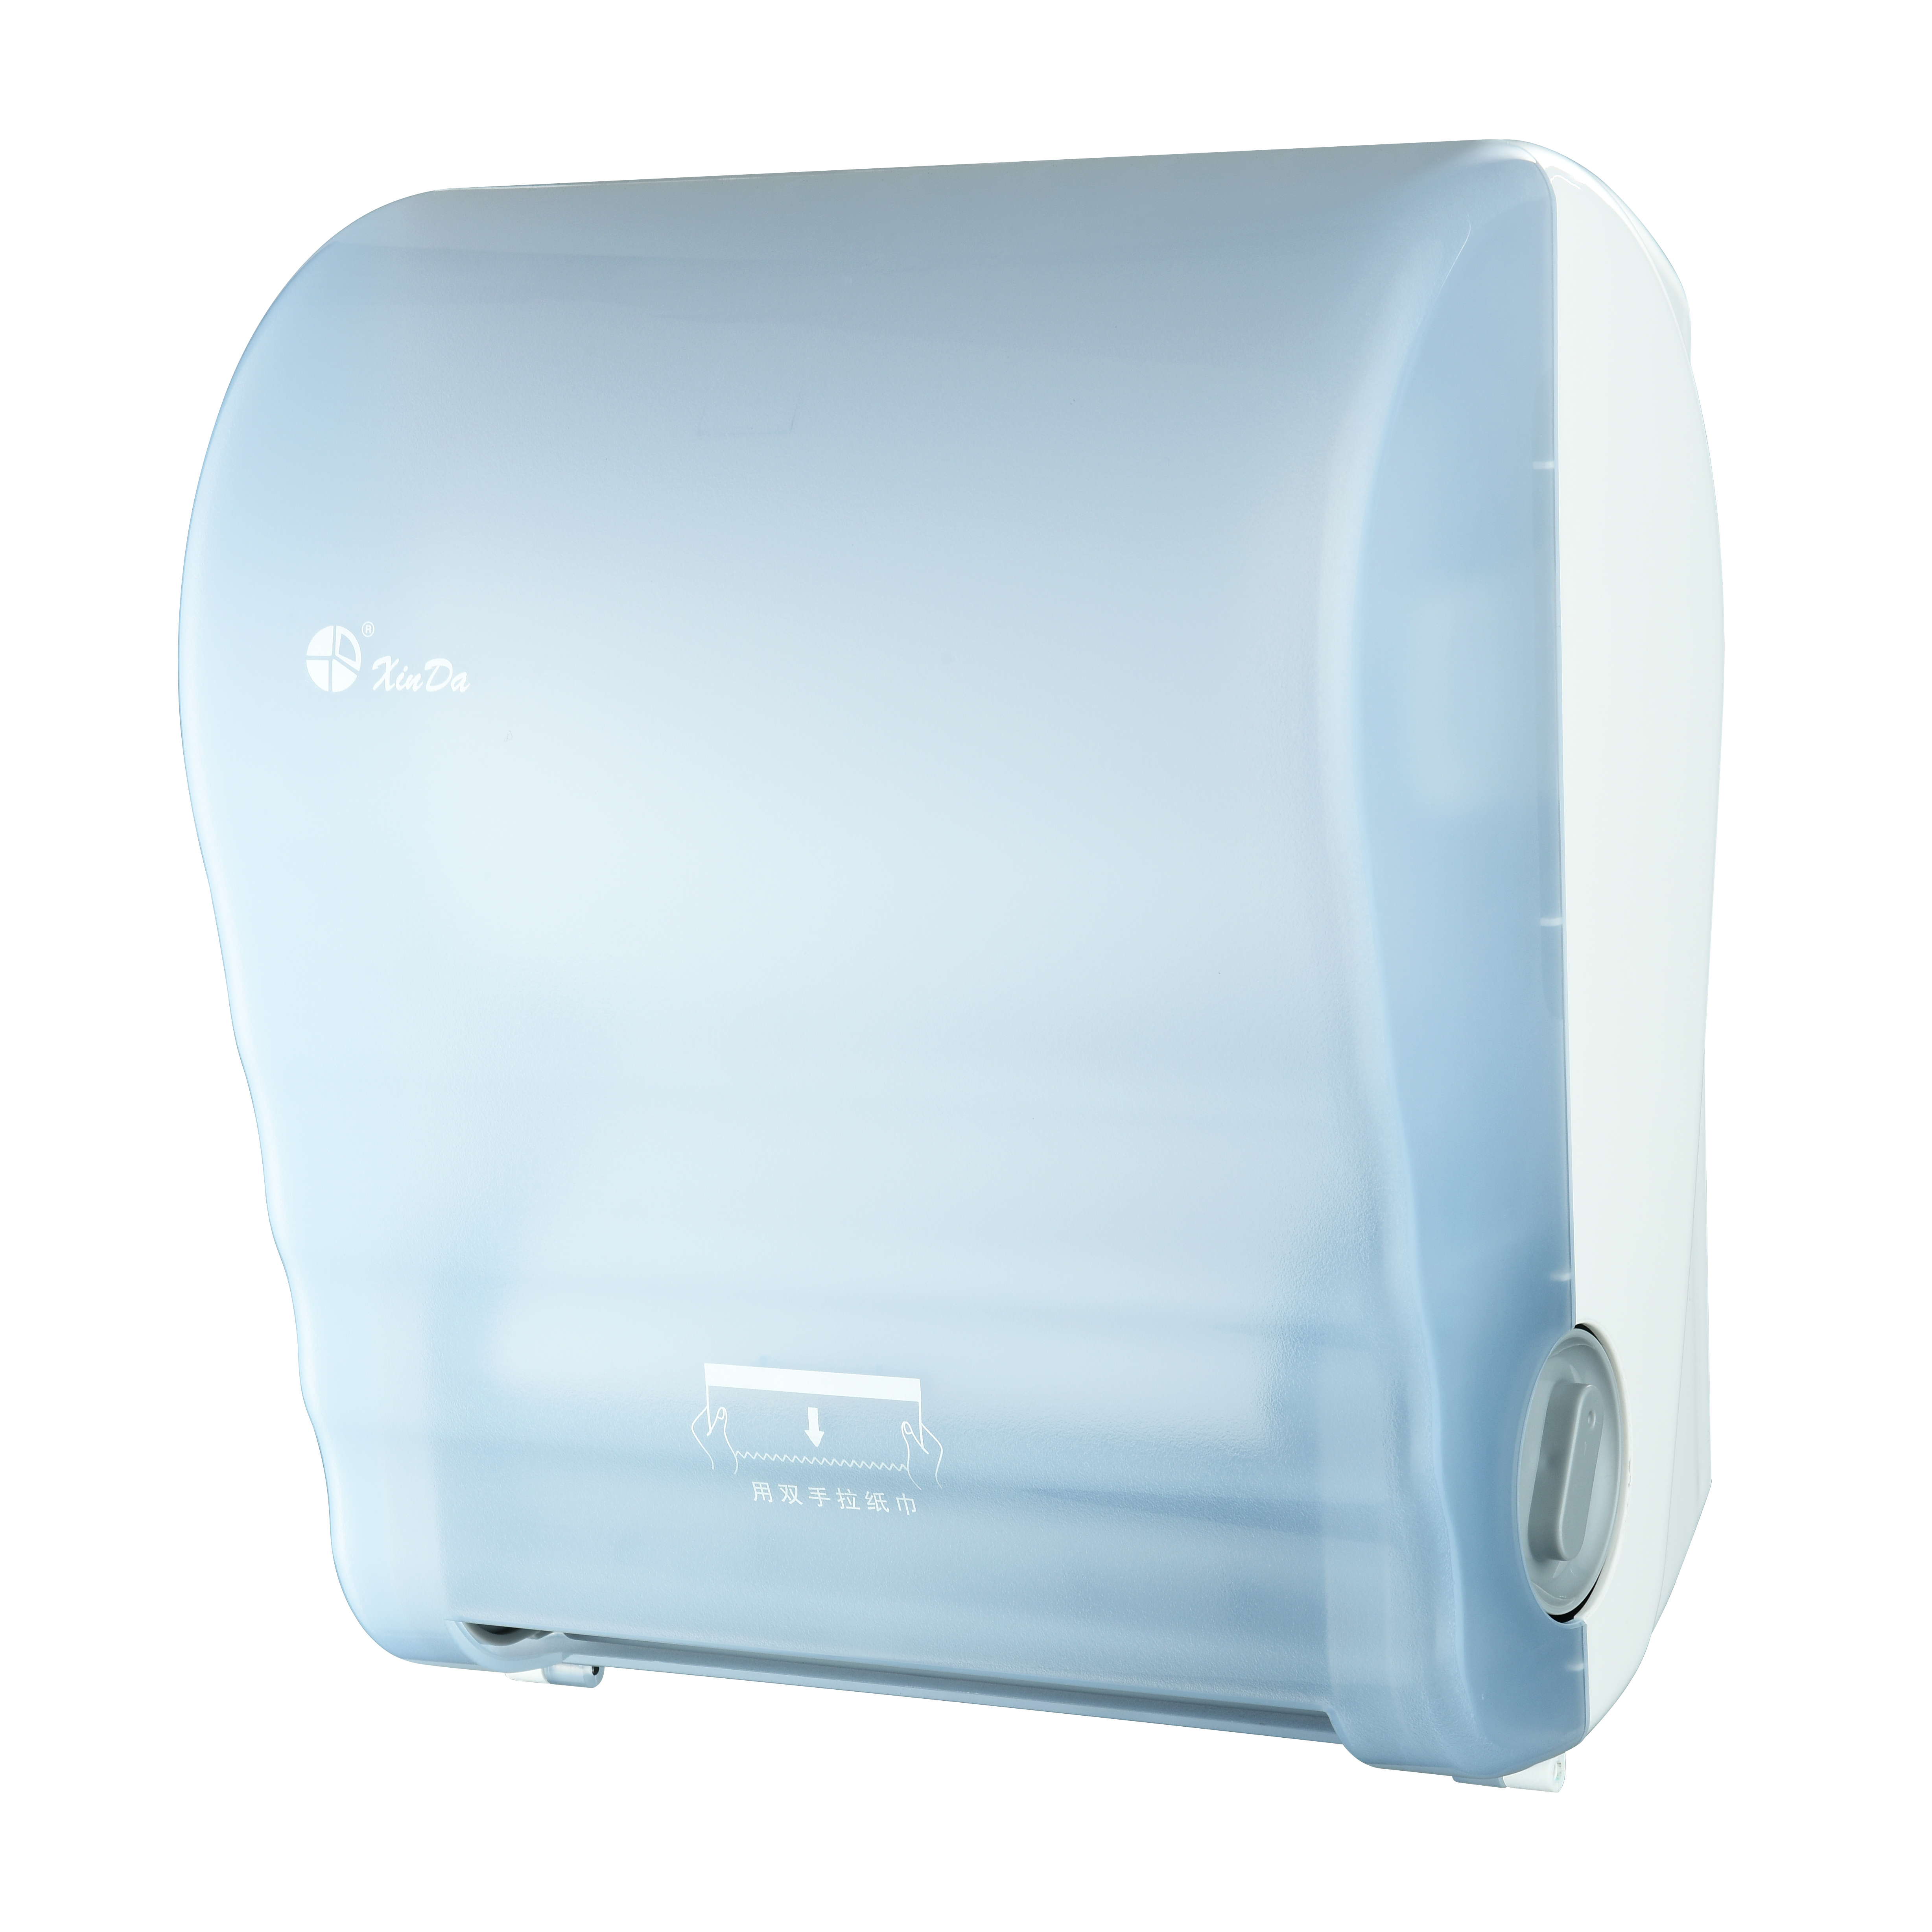 How to Choose a Bathroom Tissue Roll Holder?